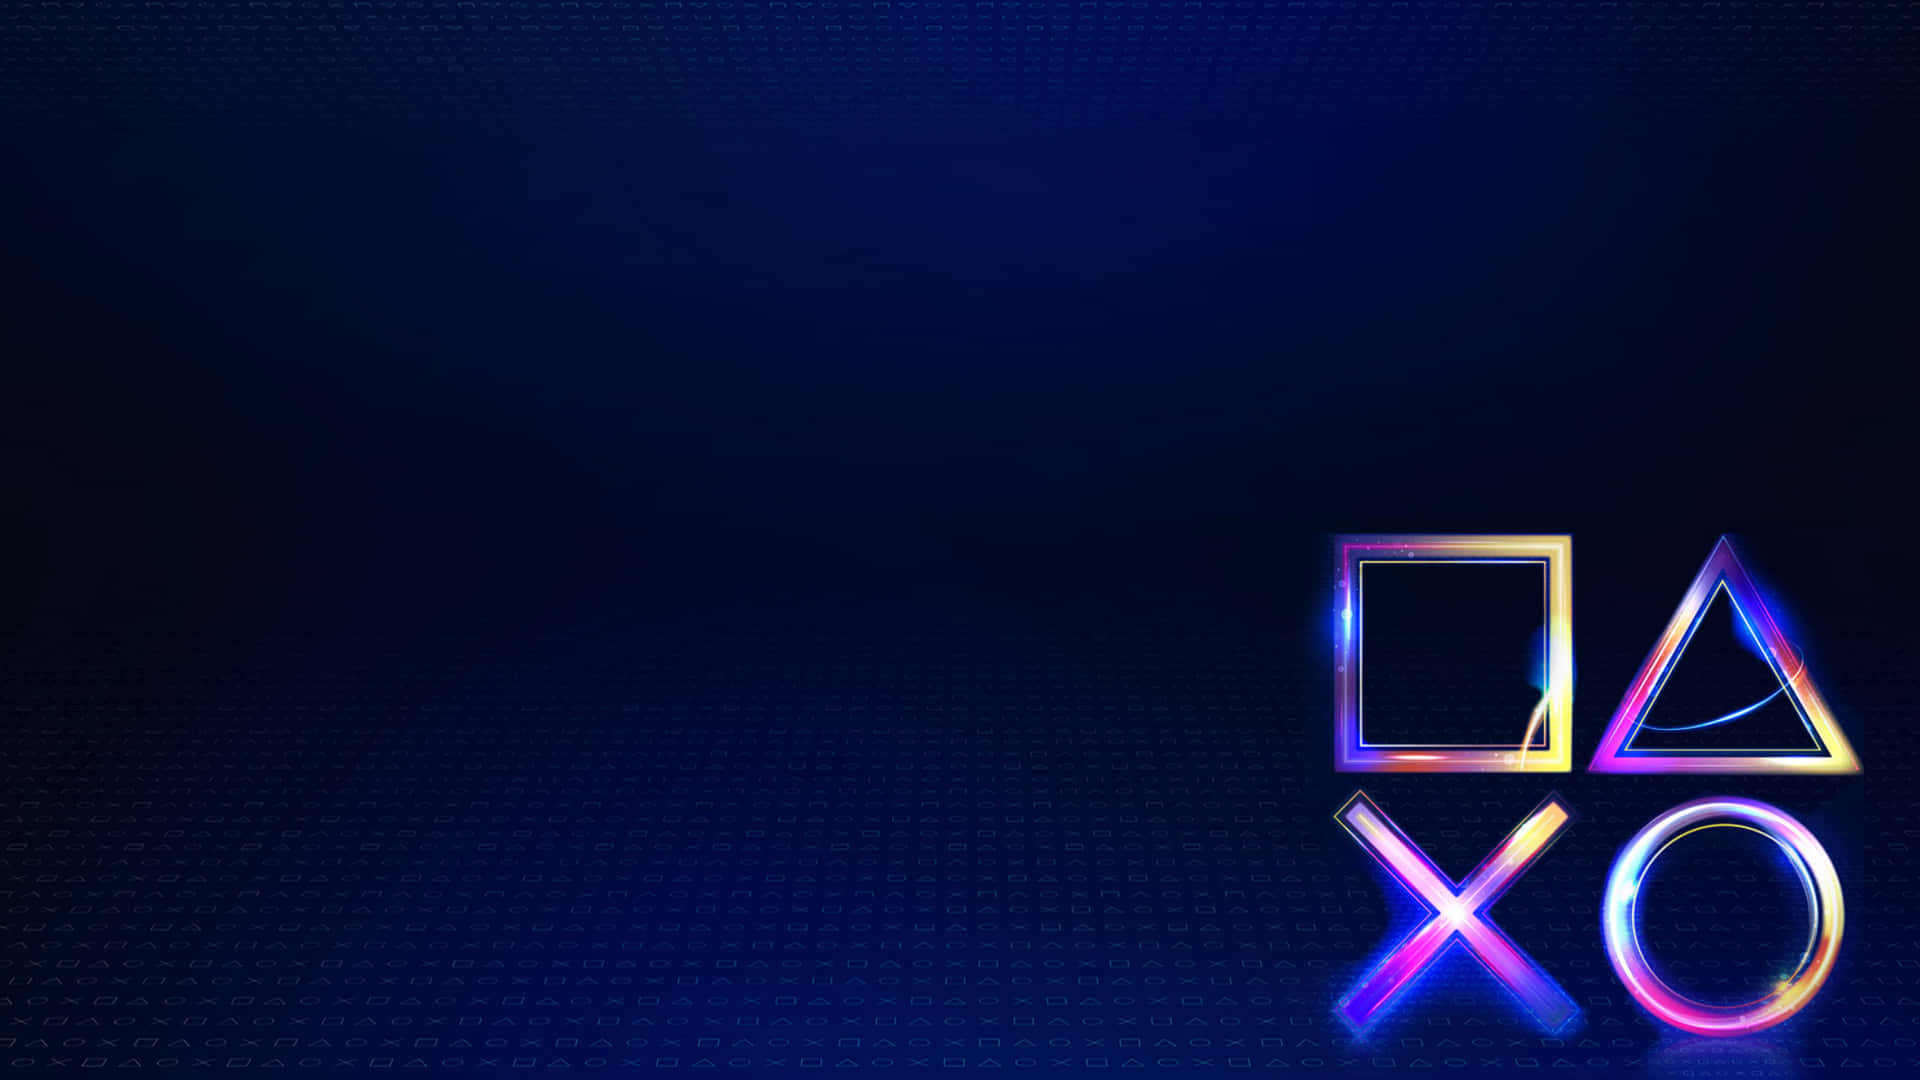 Step up your gaming setup with this custom PS4 theme Wallpaper